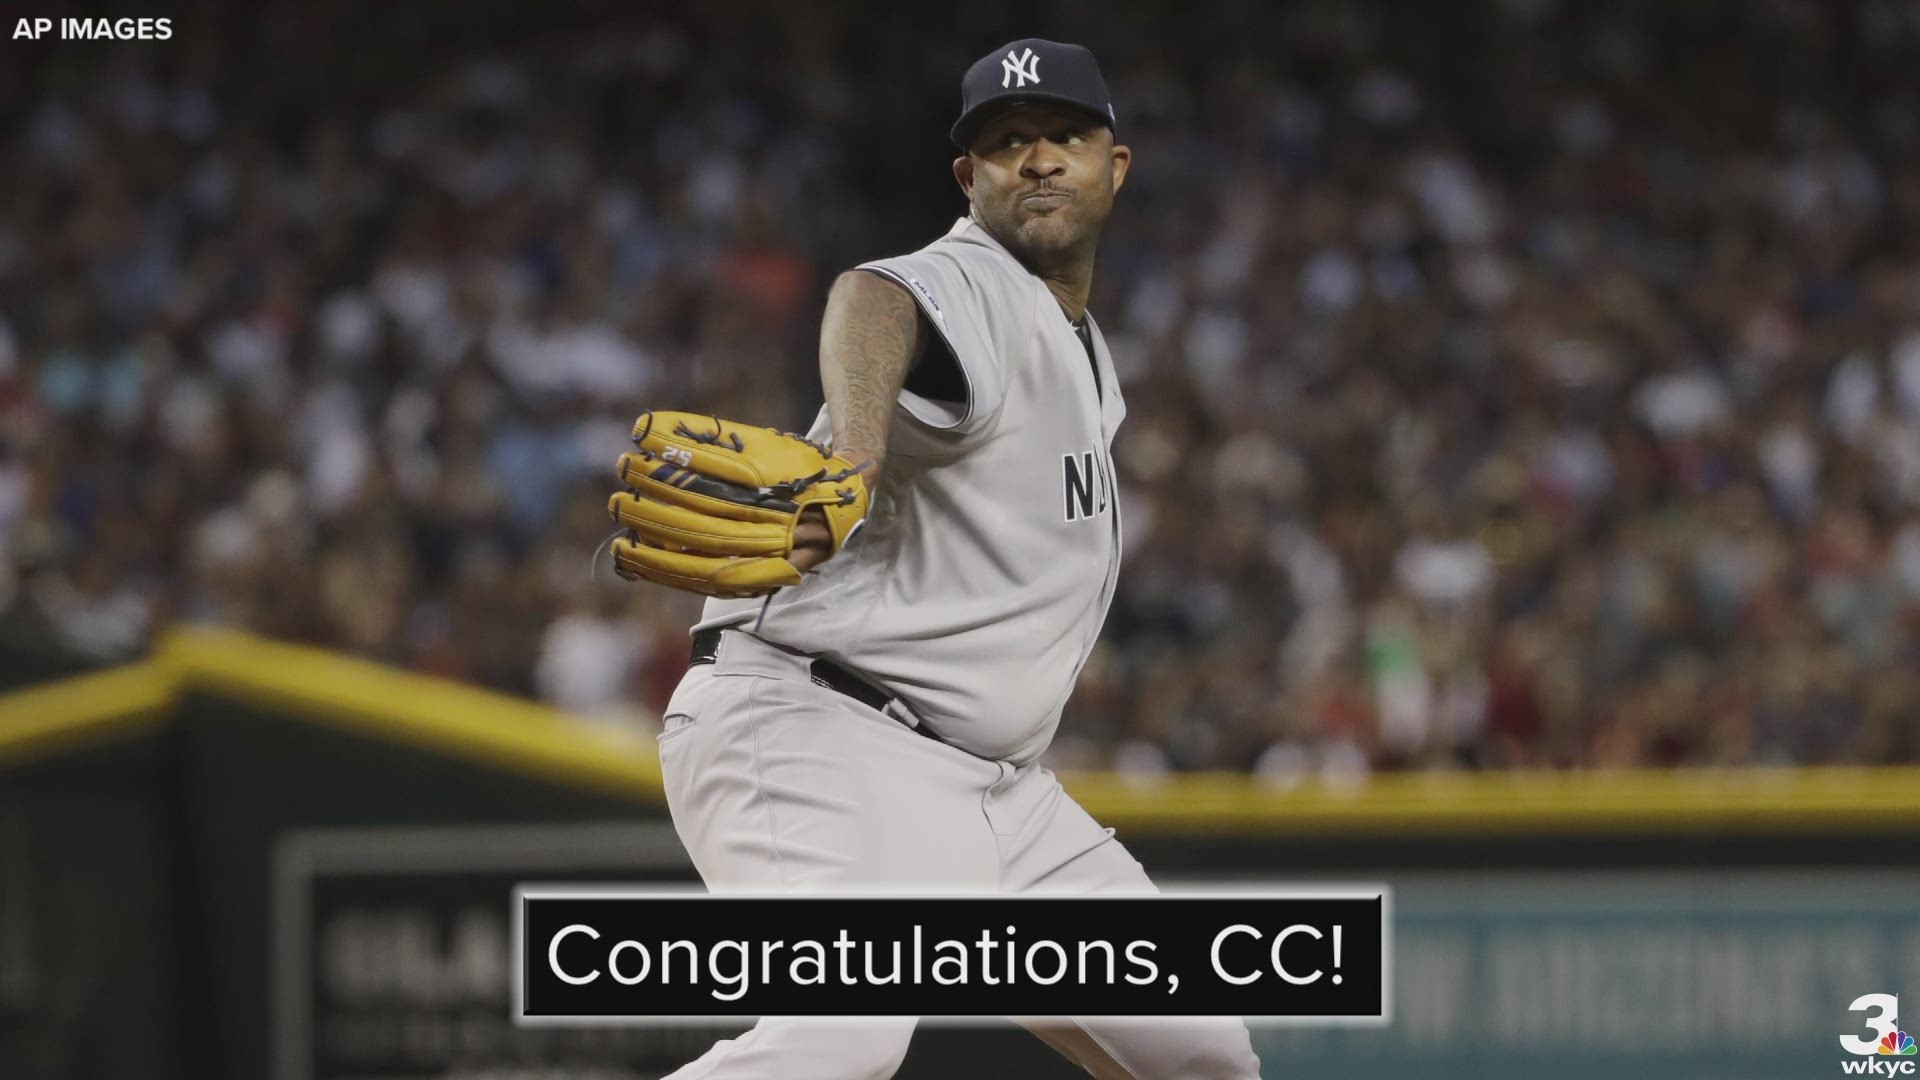 CC Sabathia on nearly winning 2007 World Series and being traded